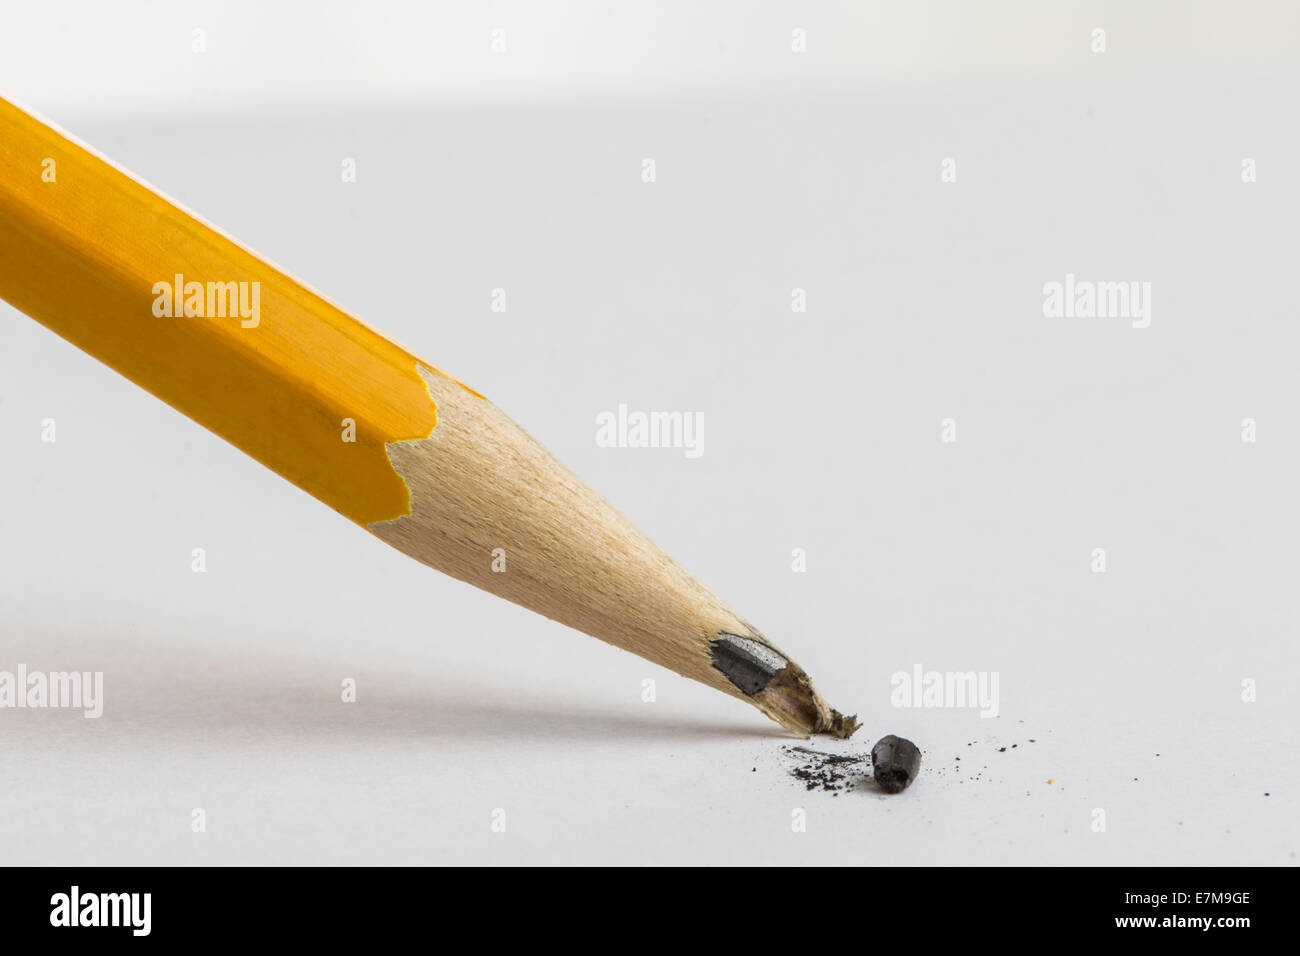 A sharpened yellow pencil over a blank sheet of paper with a broken tip. Focus on the tip of the pencil. Stock Photo